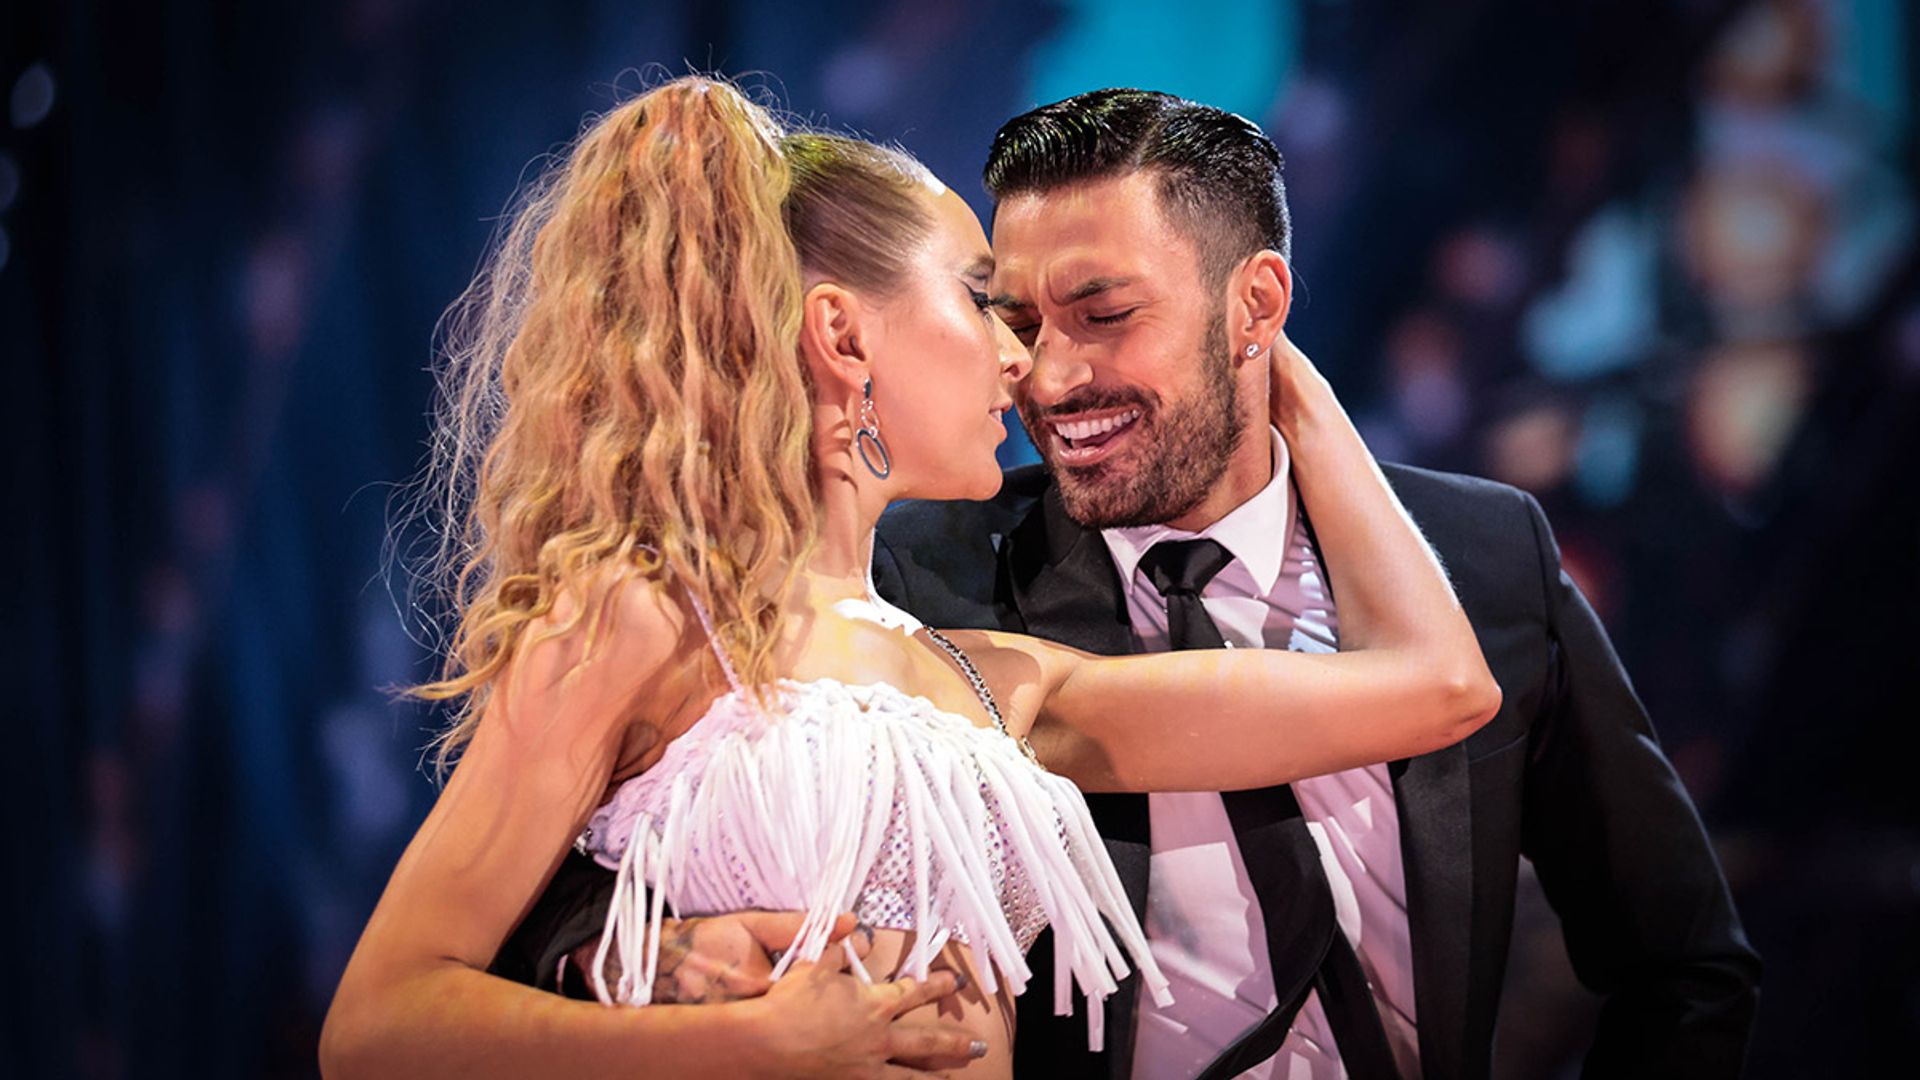 Fans can't handle 'cuteness' of Rose Ayling-Ellis and Giovanni Pernice in semi-final snap